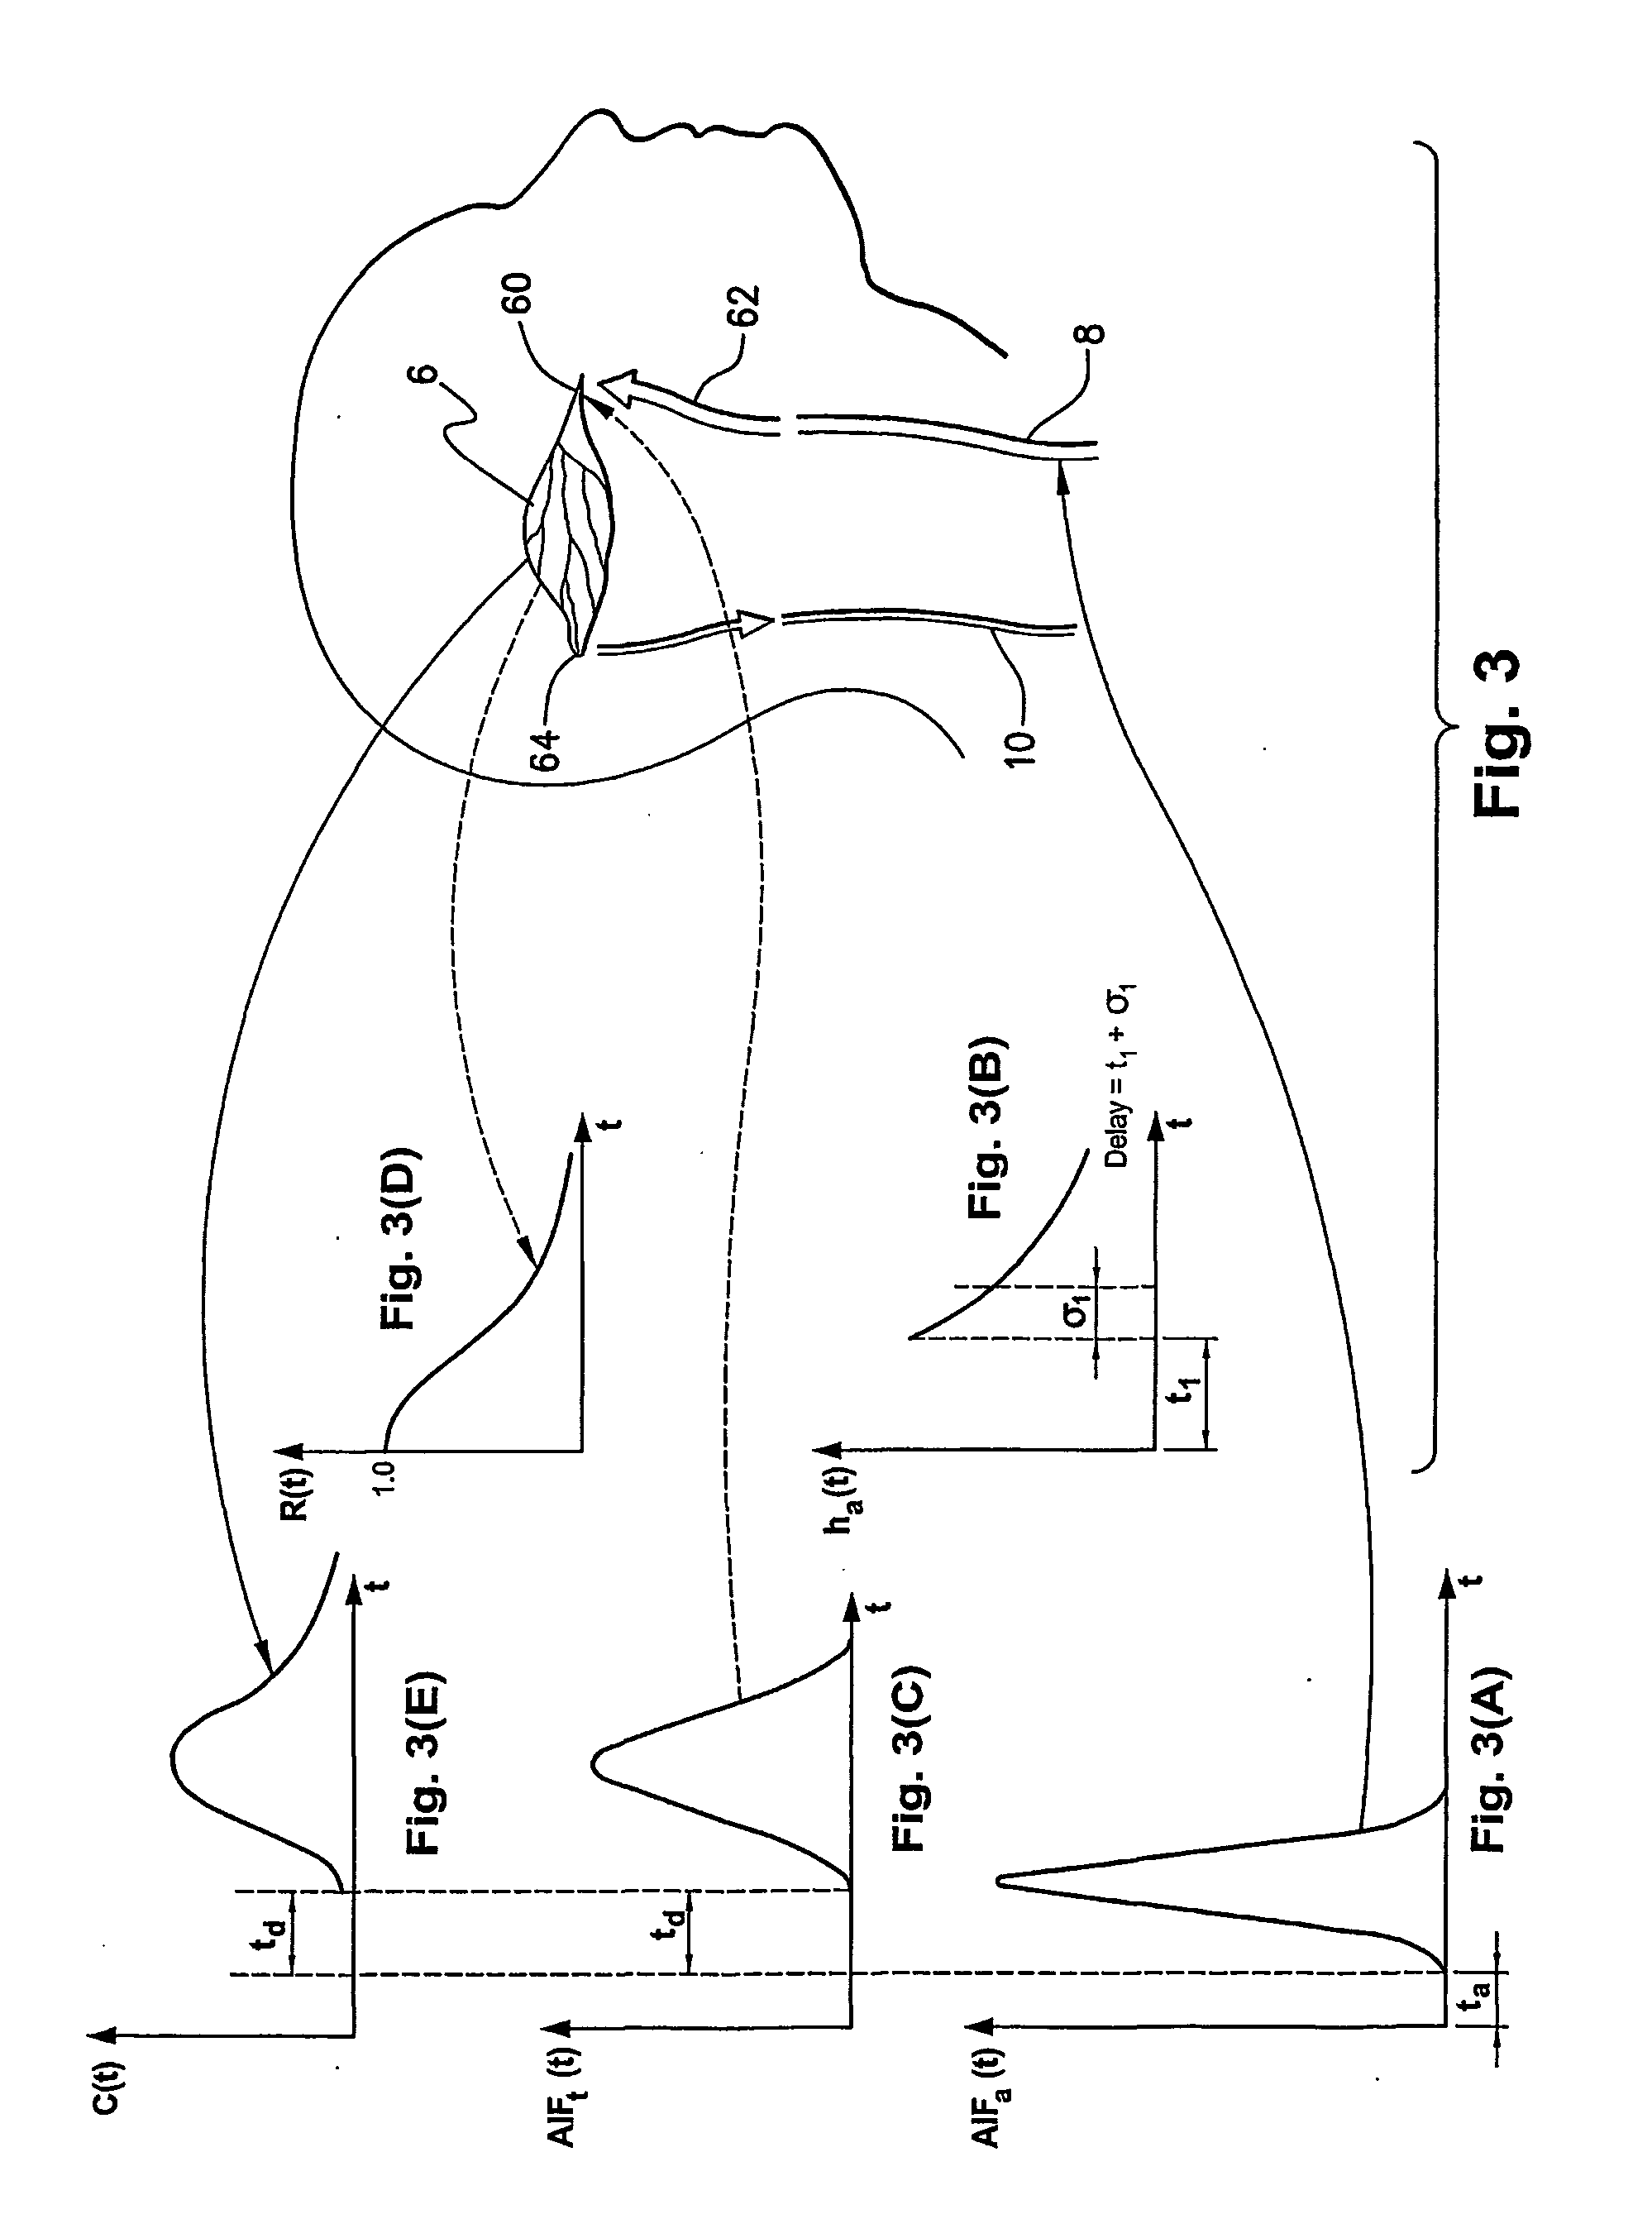 Method and system of obtaining improved data in perfusion measurements